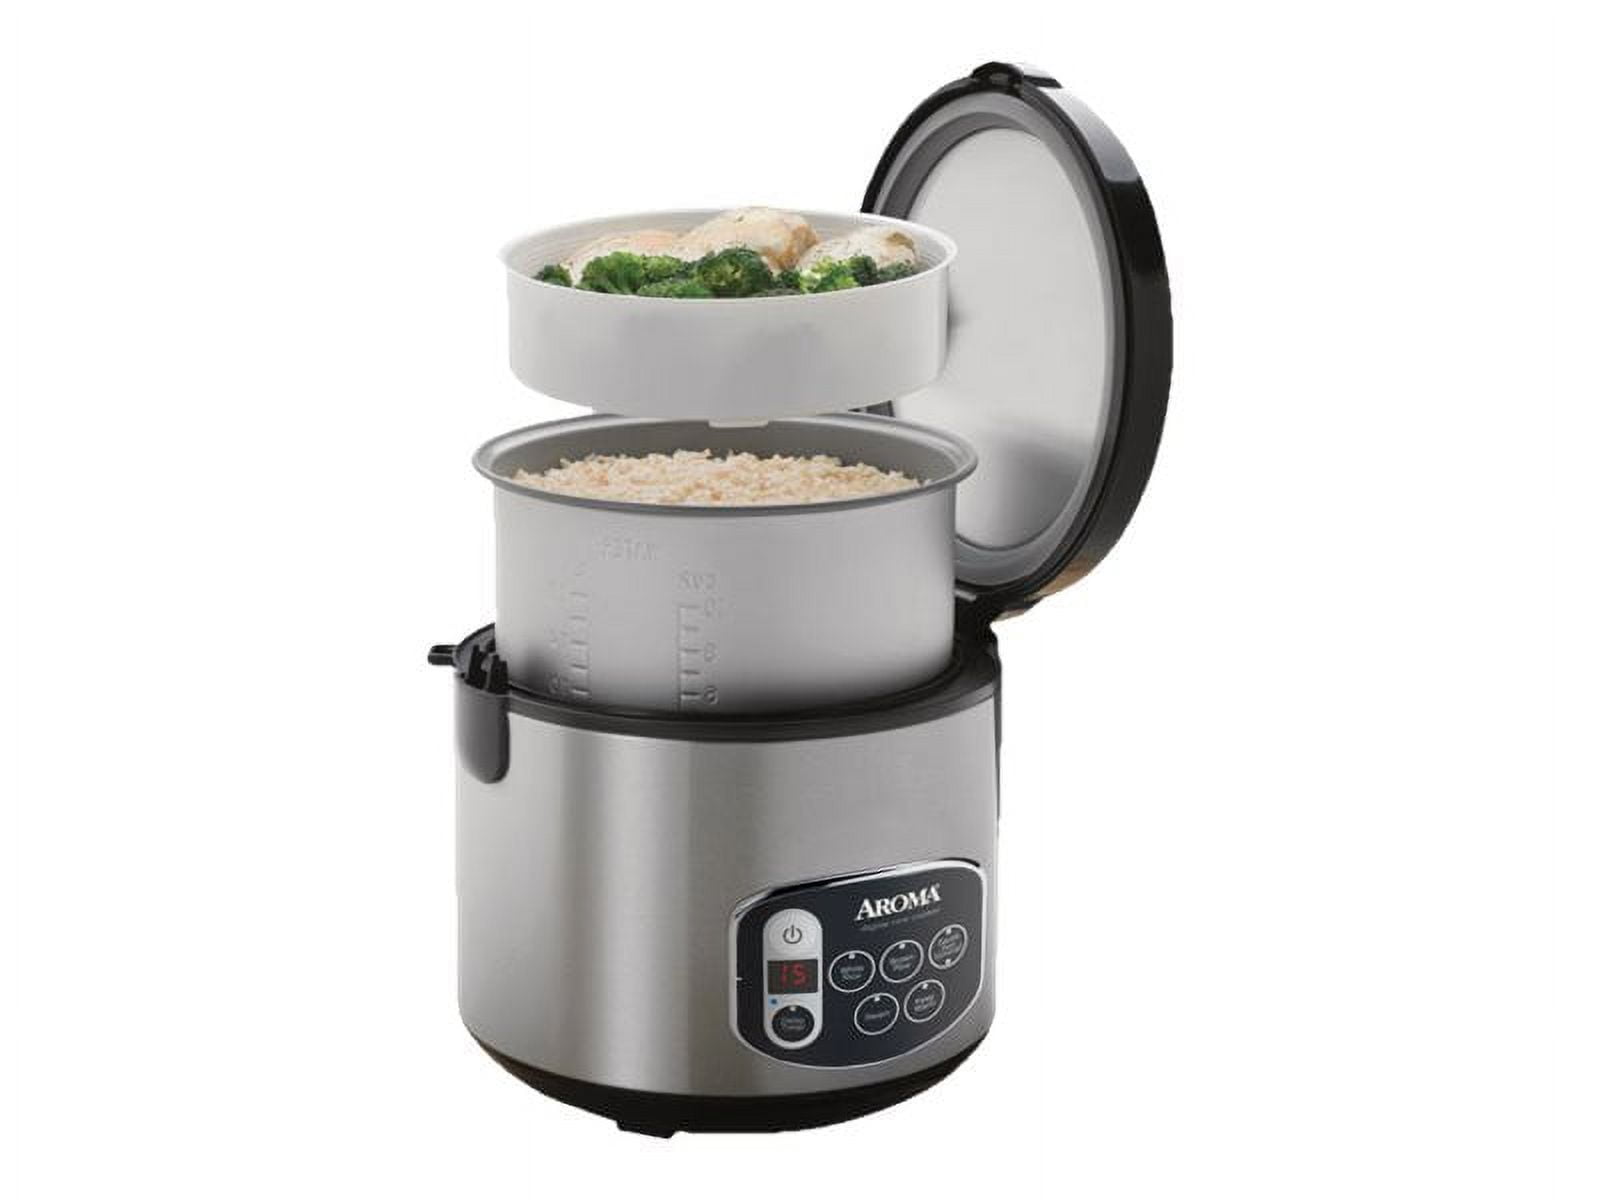 Aroma ARC-1010SB 10 Cup Digital Rice Cooker 5 functions With A Delay Feature